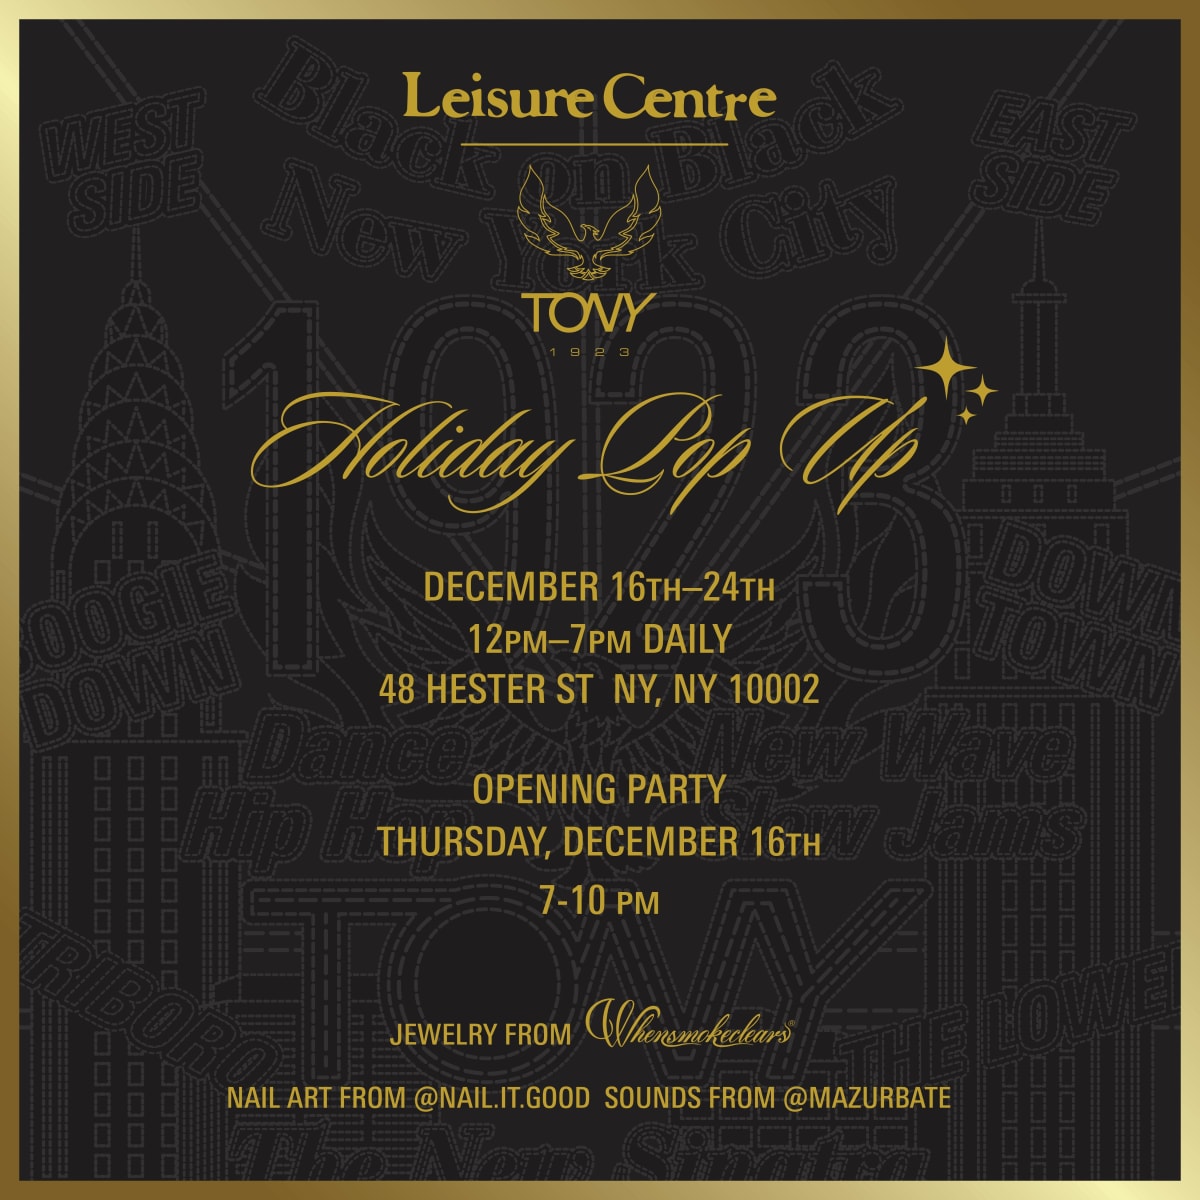 Leisure Centre - TONY 1923 Opening Event - Holiday Pop Up In NYC - 12/16 to 12/24